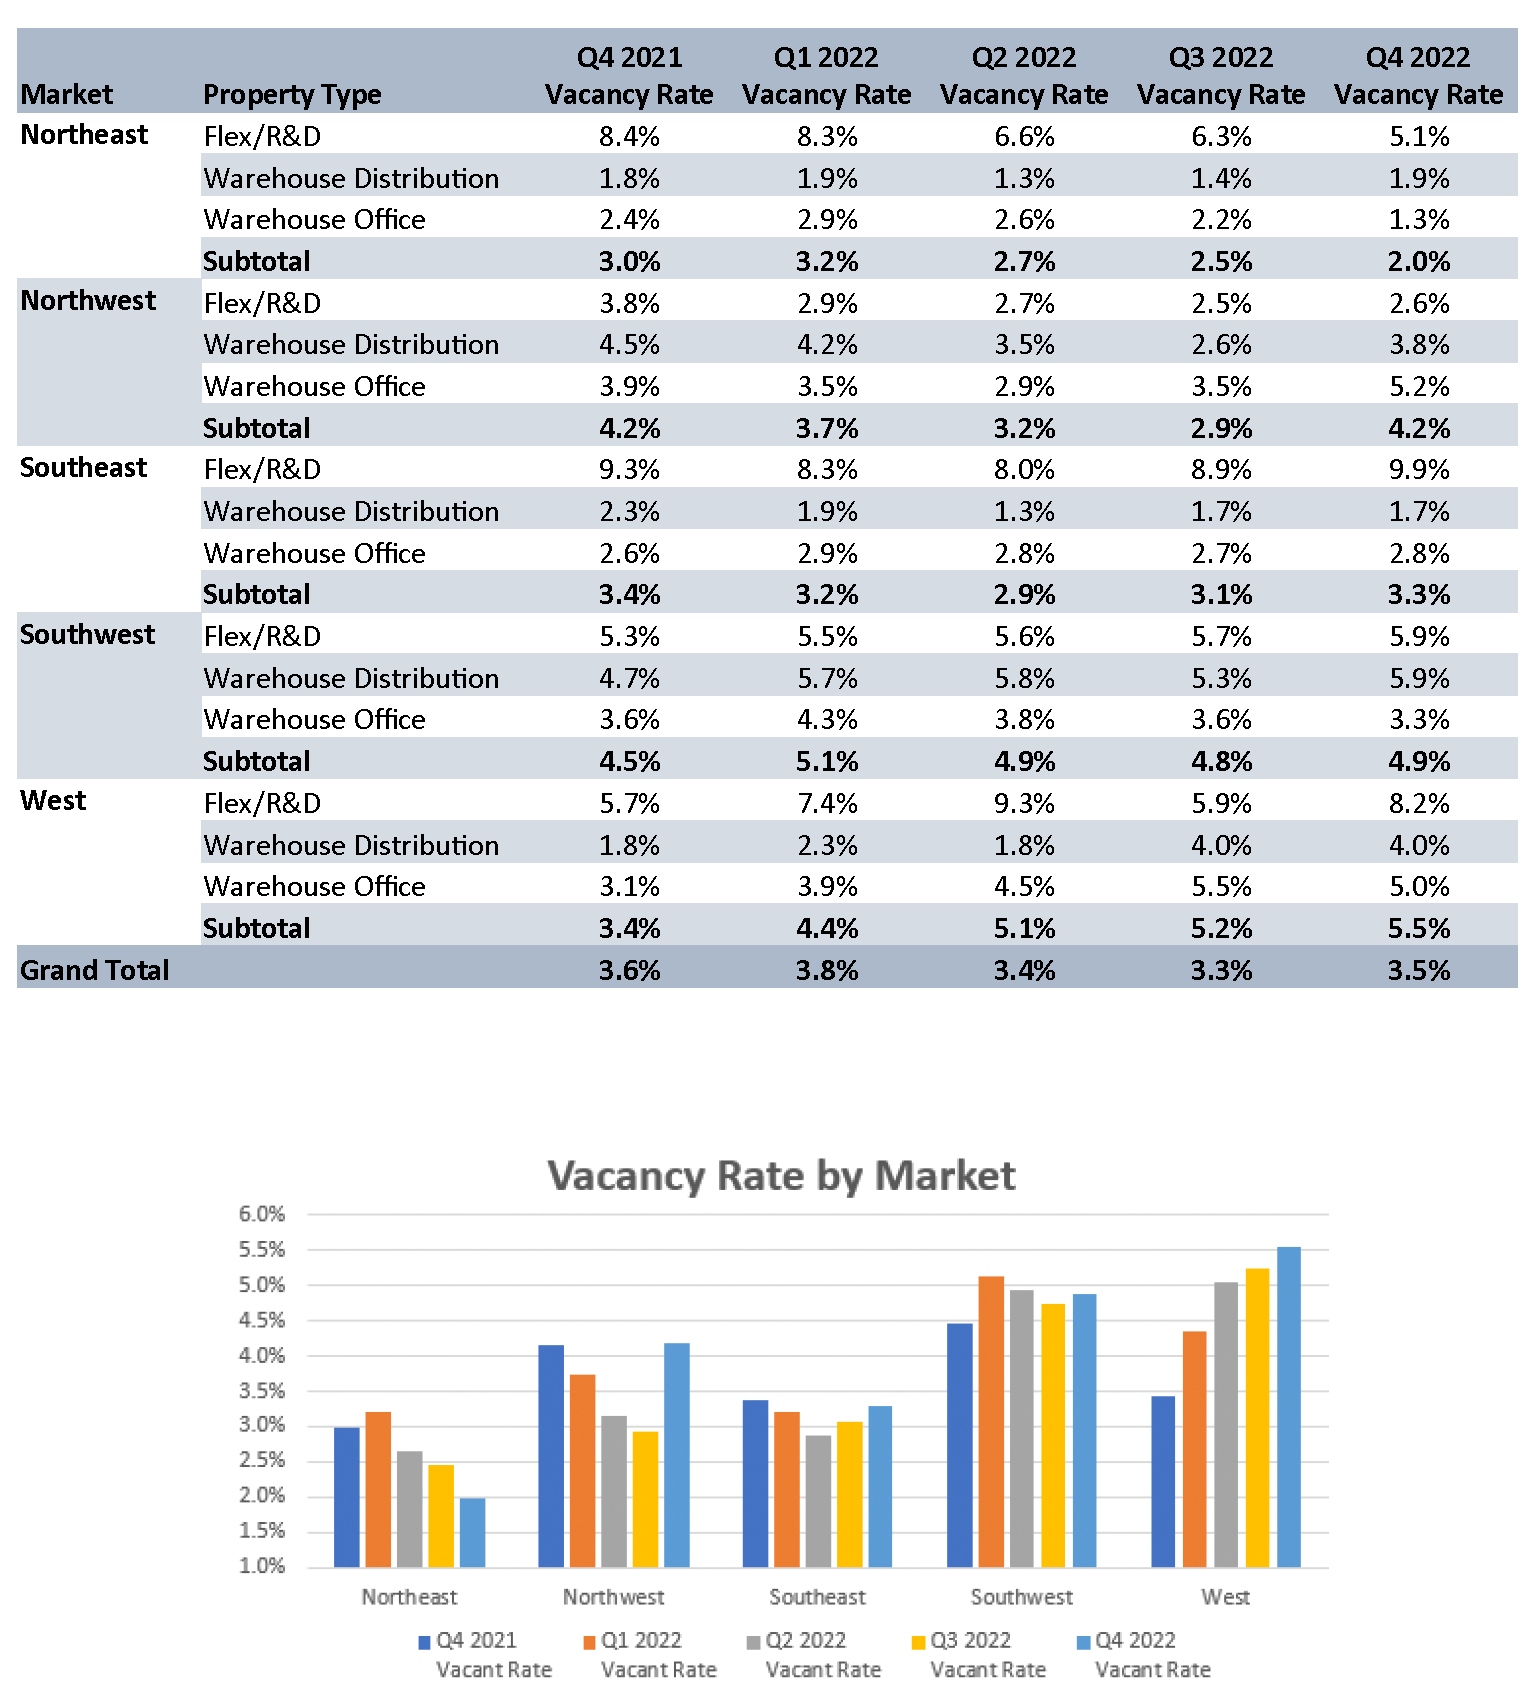 Vacancy Rate by Market - Industrial